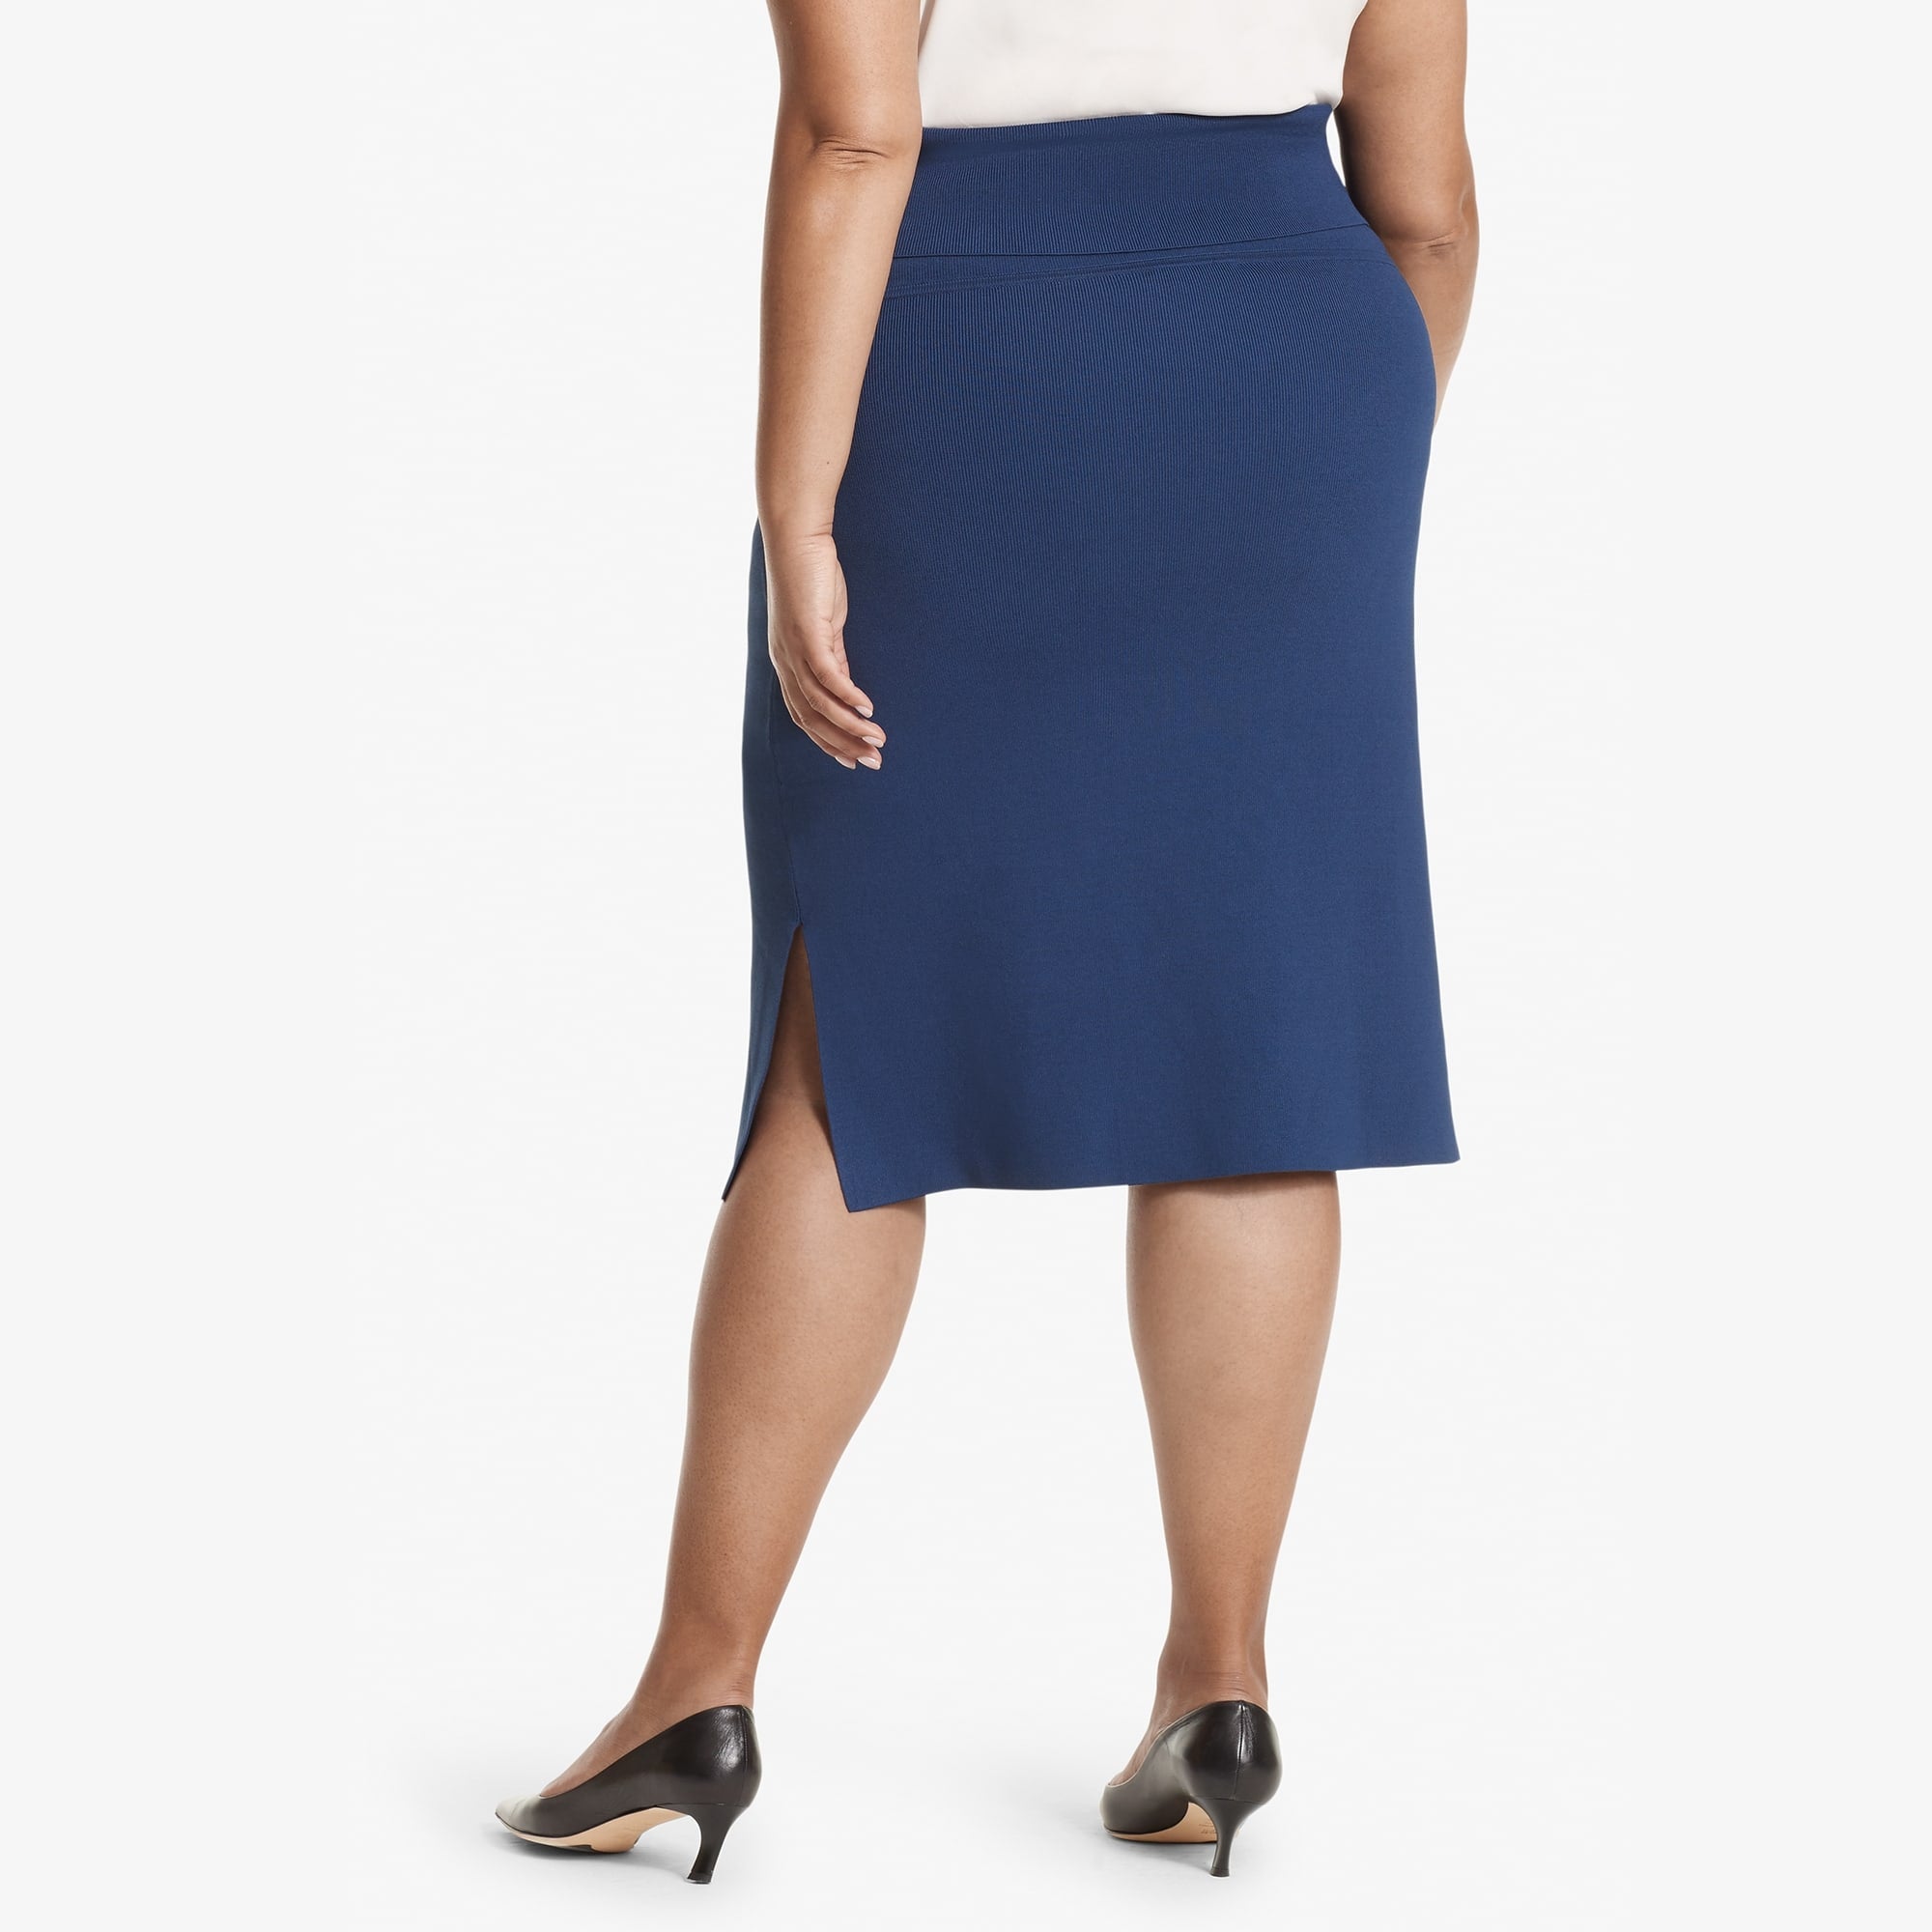 Back image of a woman standing wearing the Harlem skirt in Regent blue